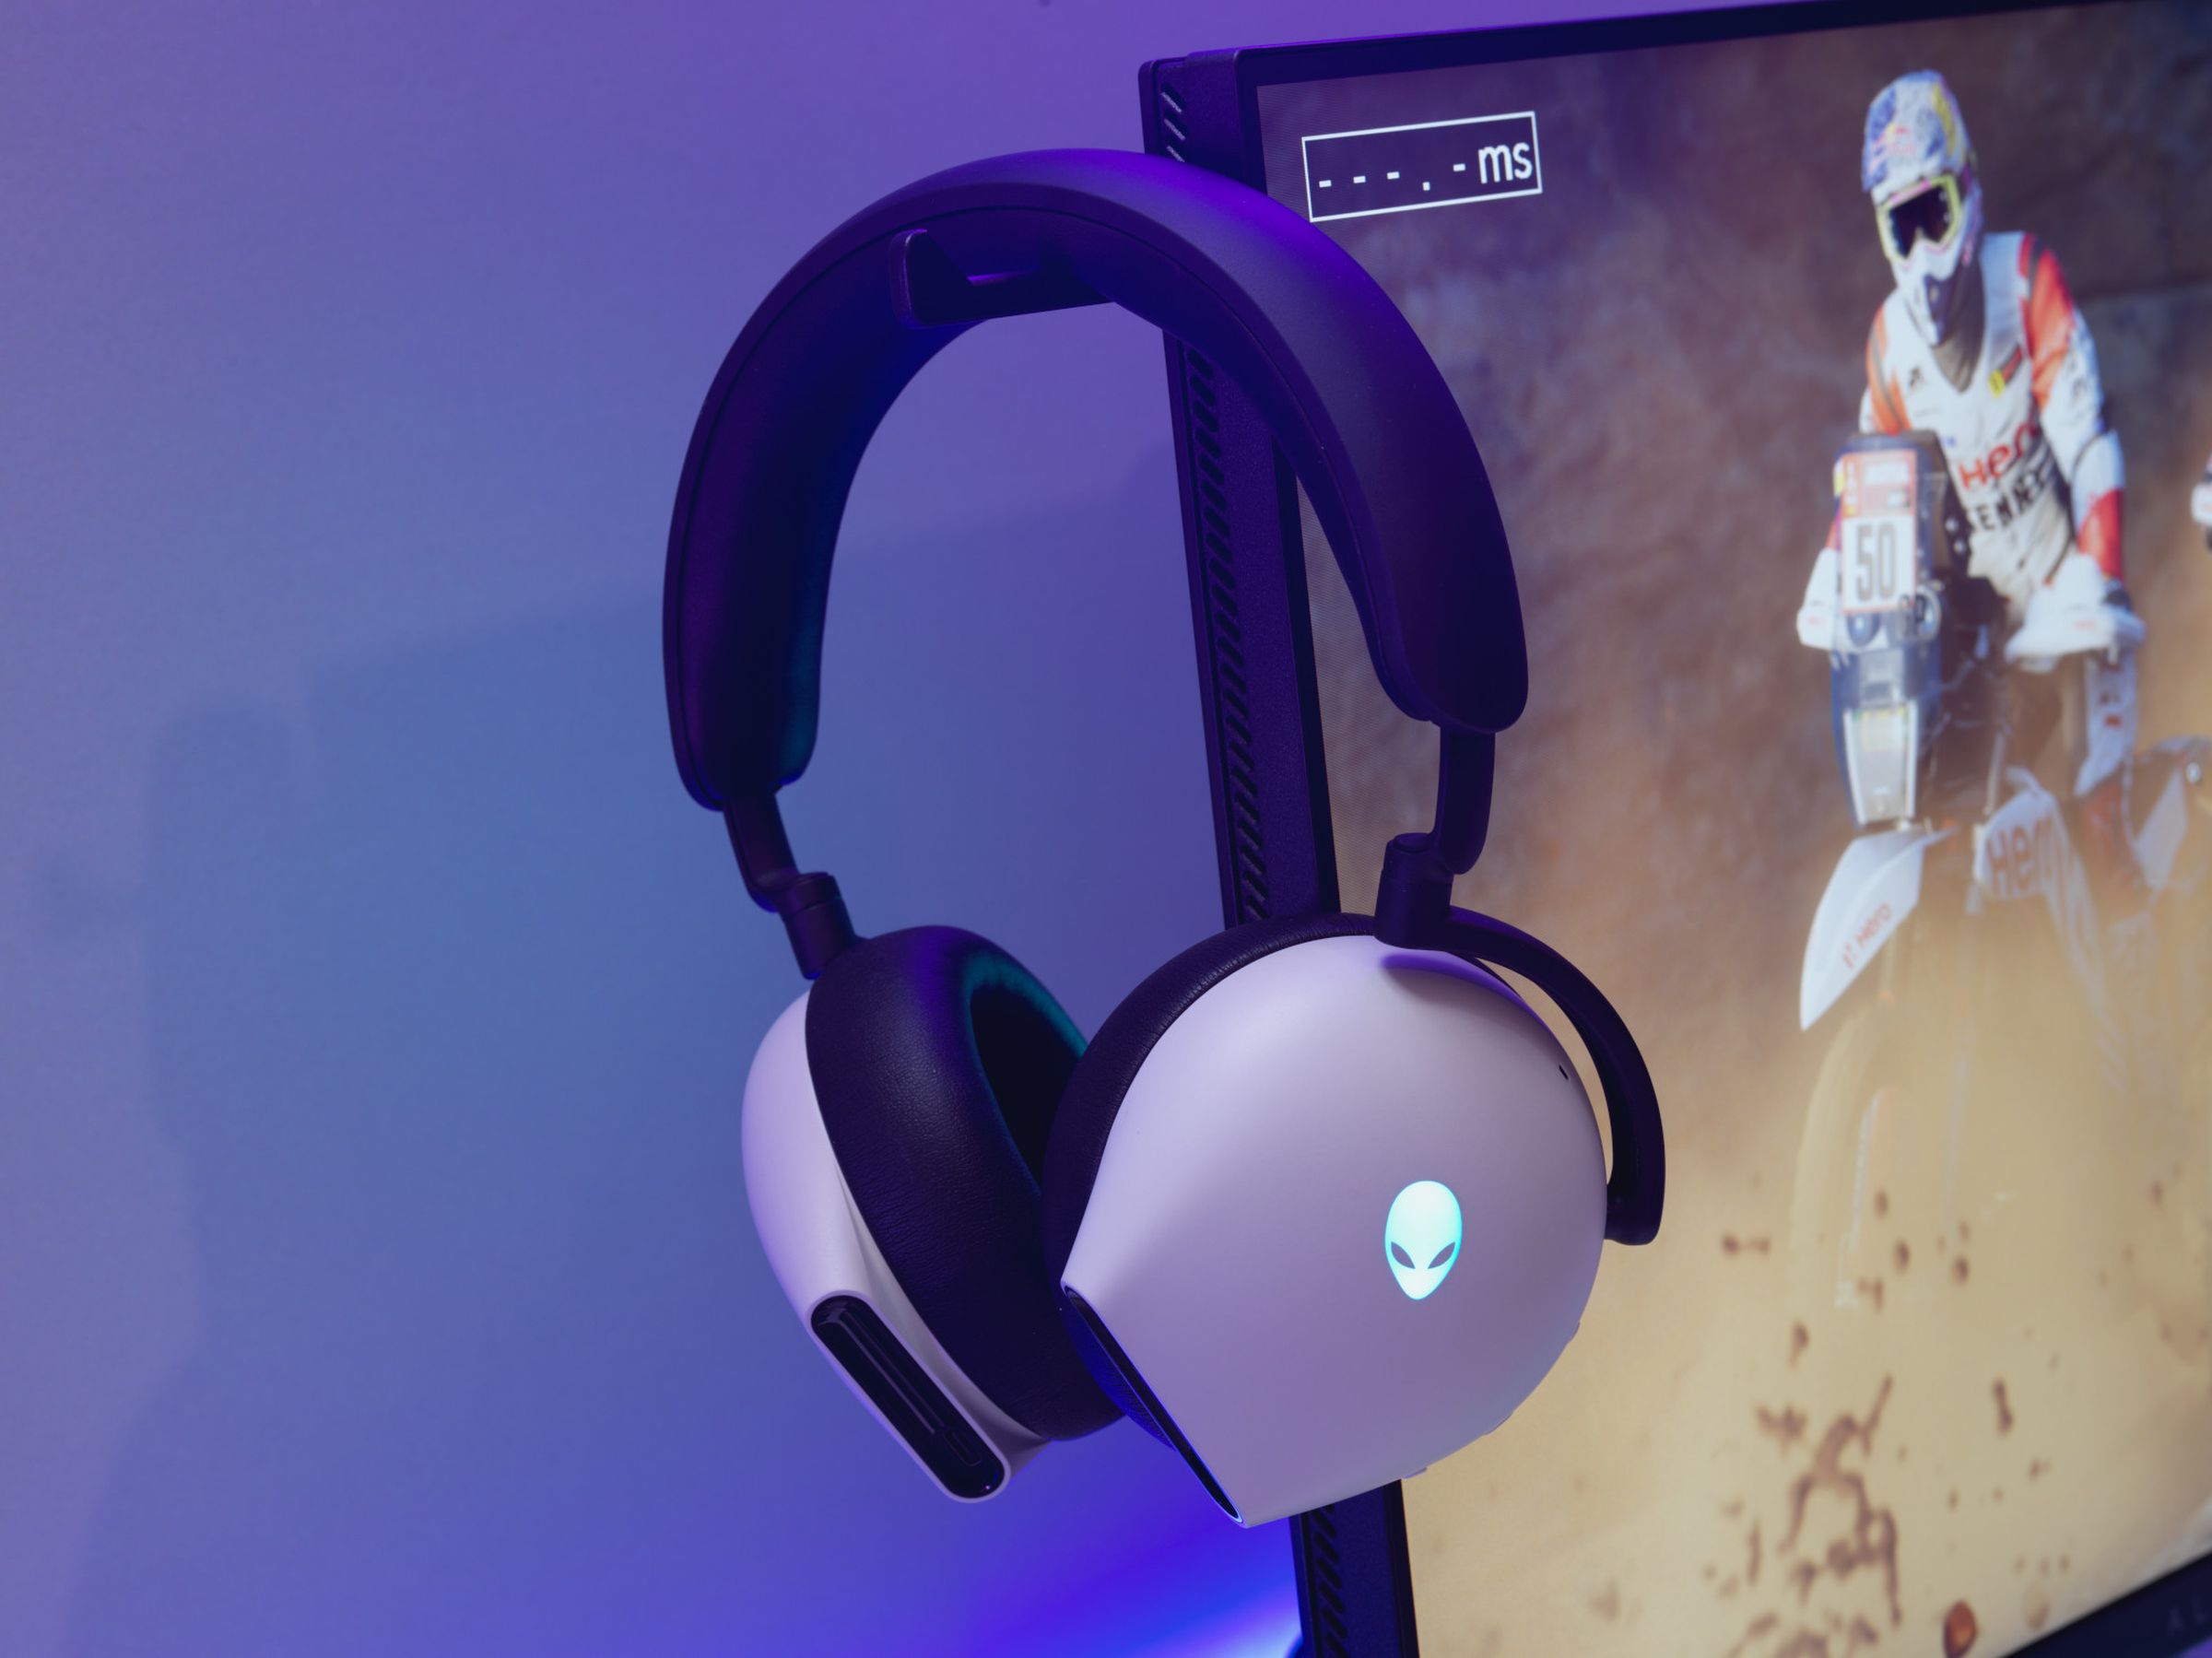 An Alienware gaming headset resting on the headset stand of an Alienware AW2524H gaming monitor.